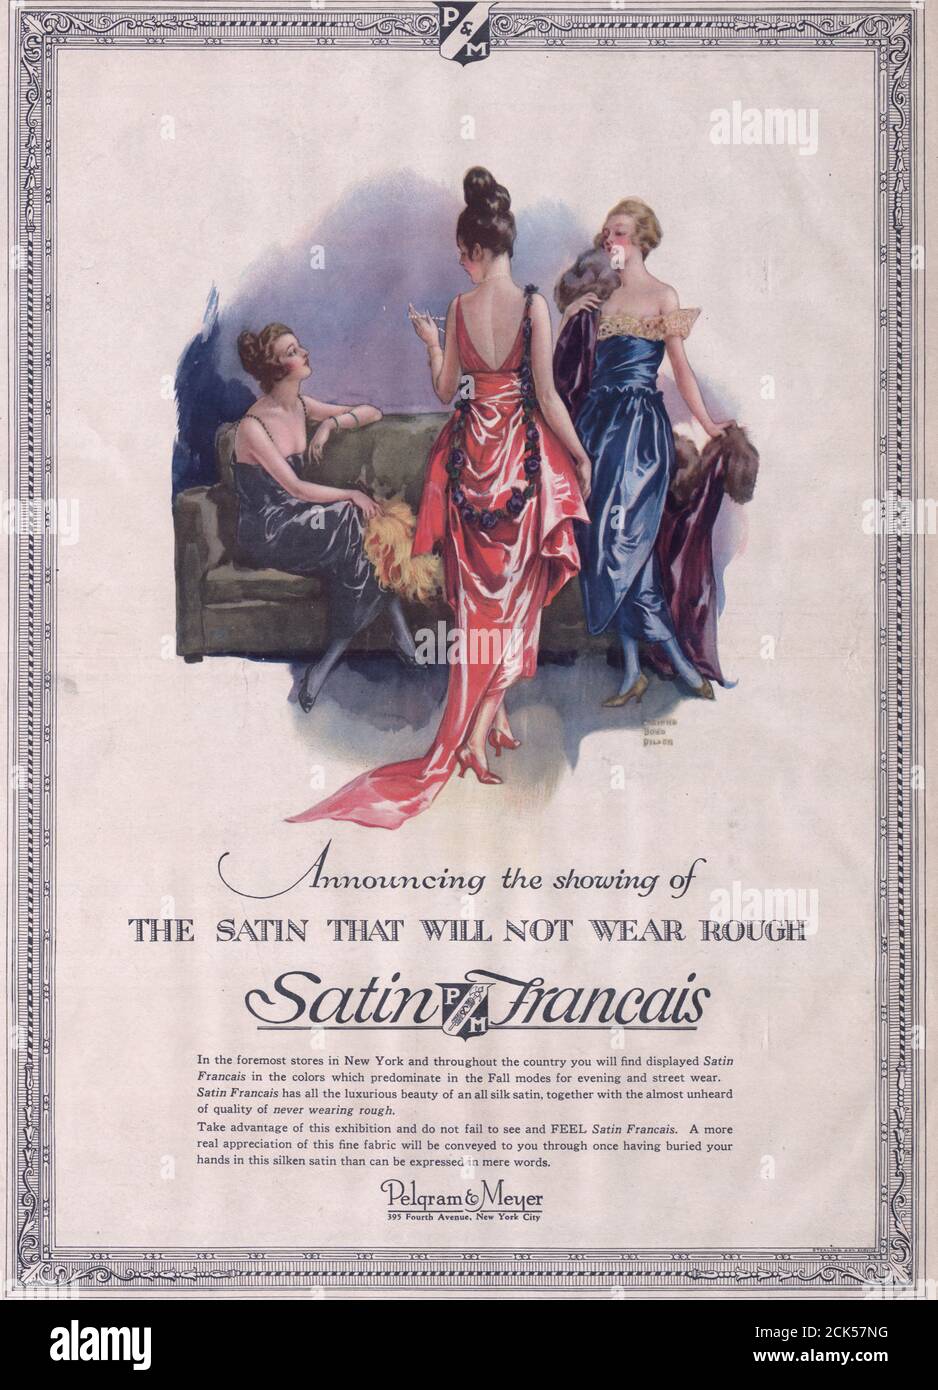 Announcing the showing of the satin that will not wear rough - Satin Francais - Advertisement, 1919 Stock Photo